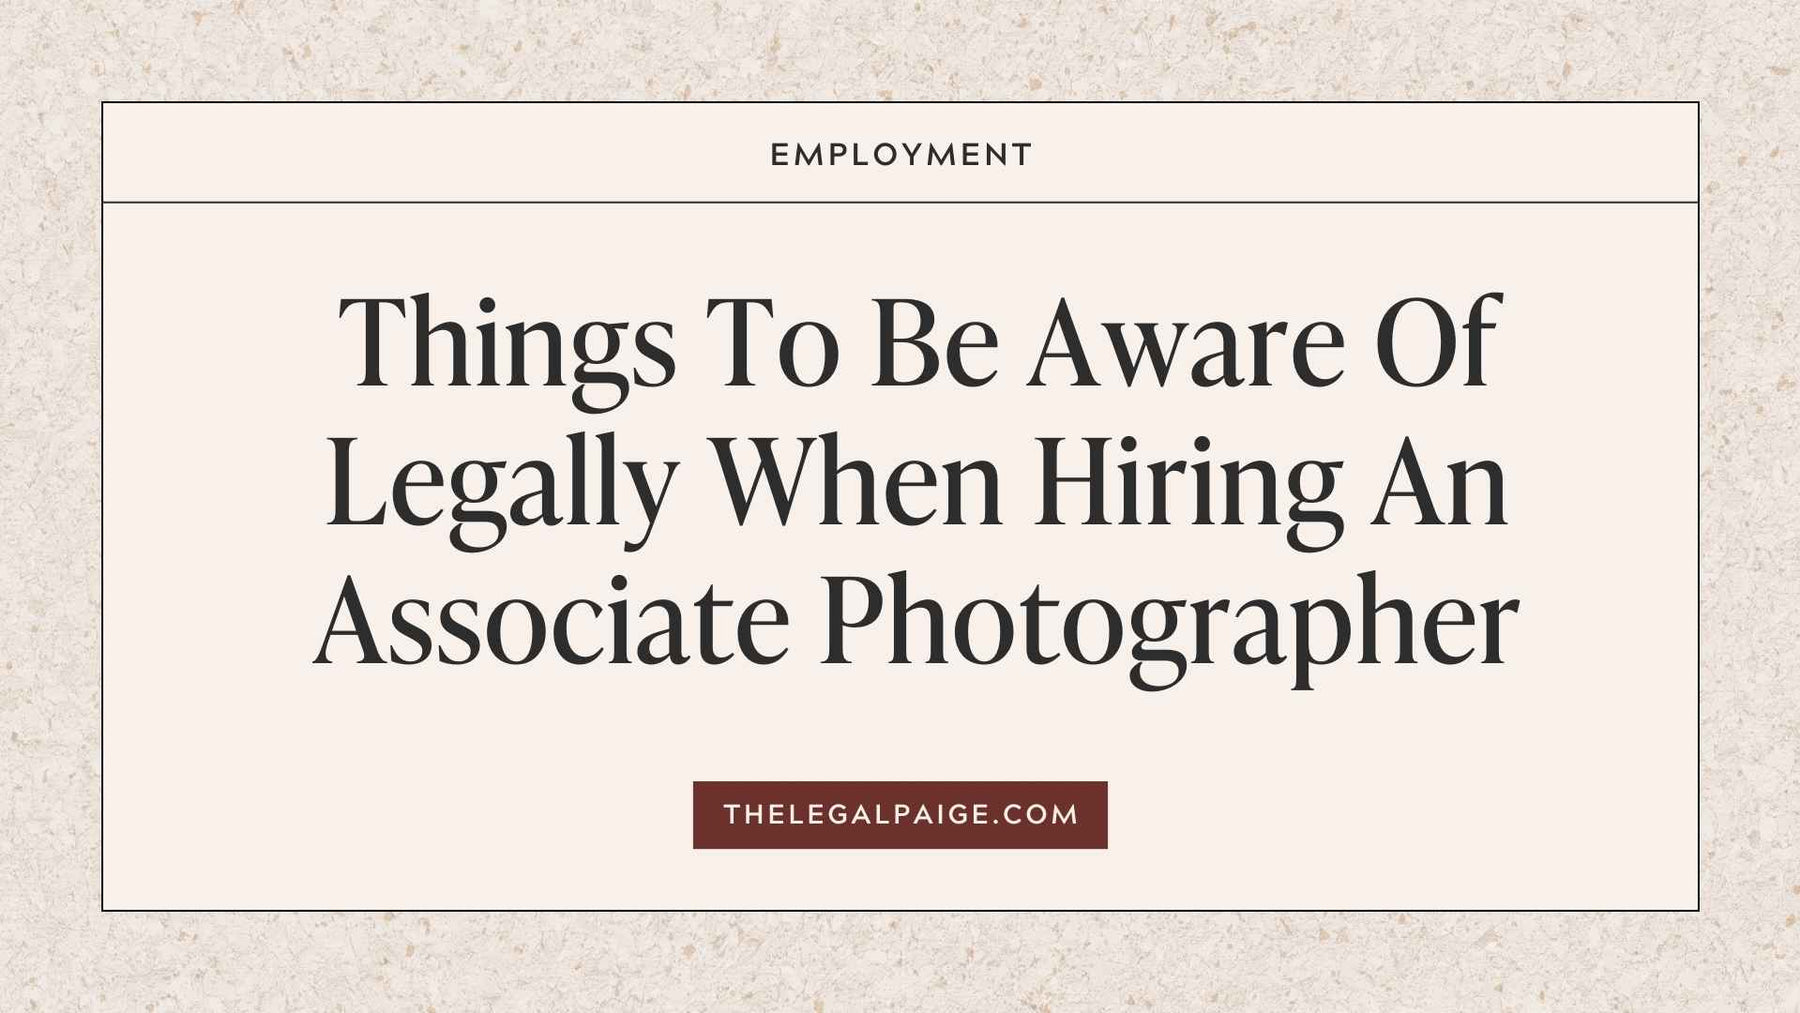 Things To Be Aware Of Legally When Hiring An Associate Photographer